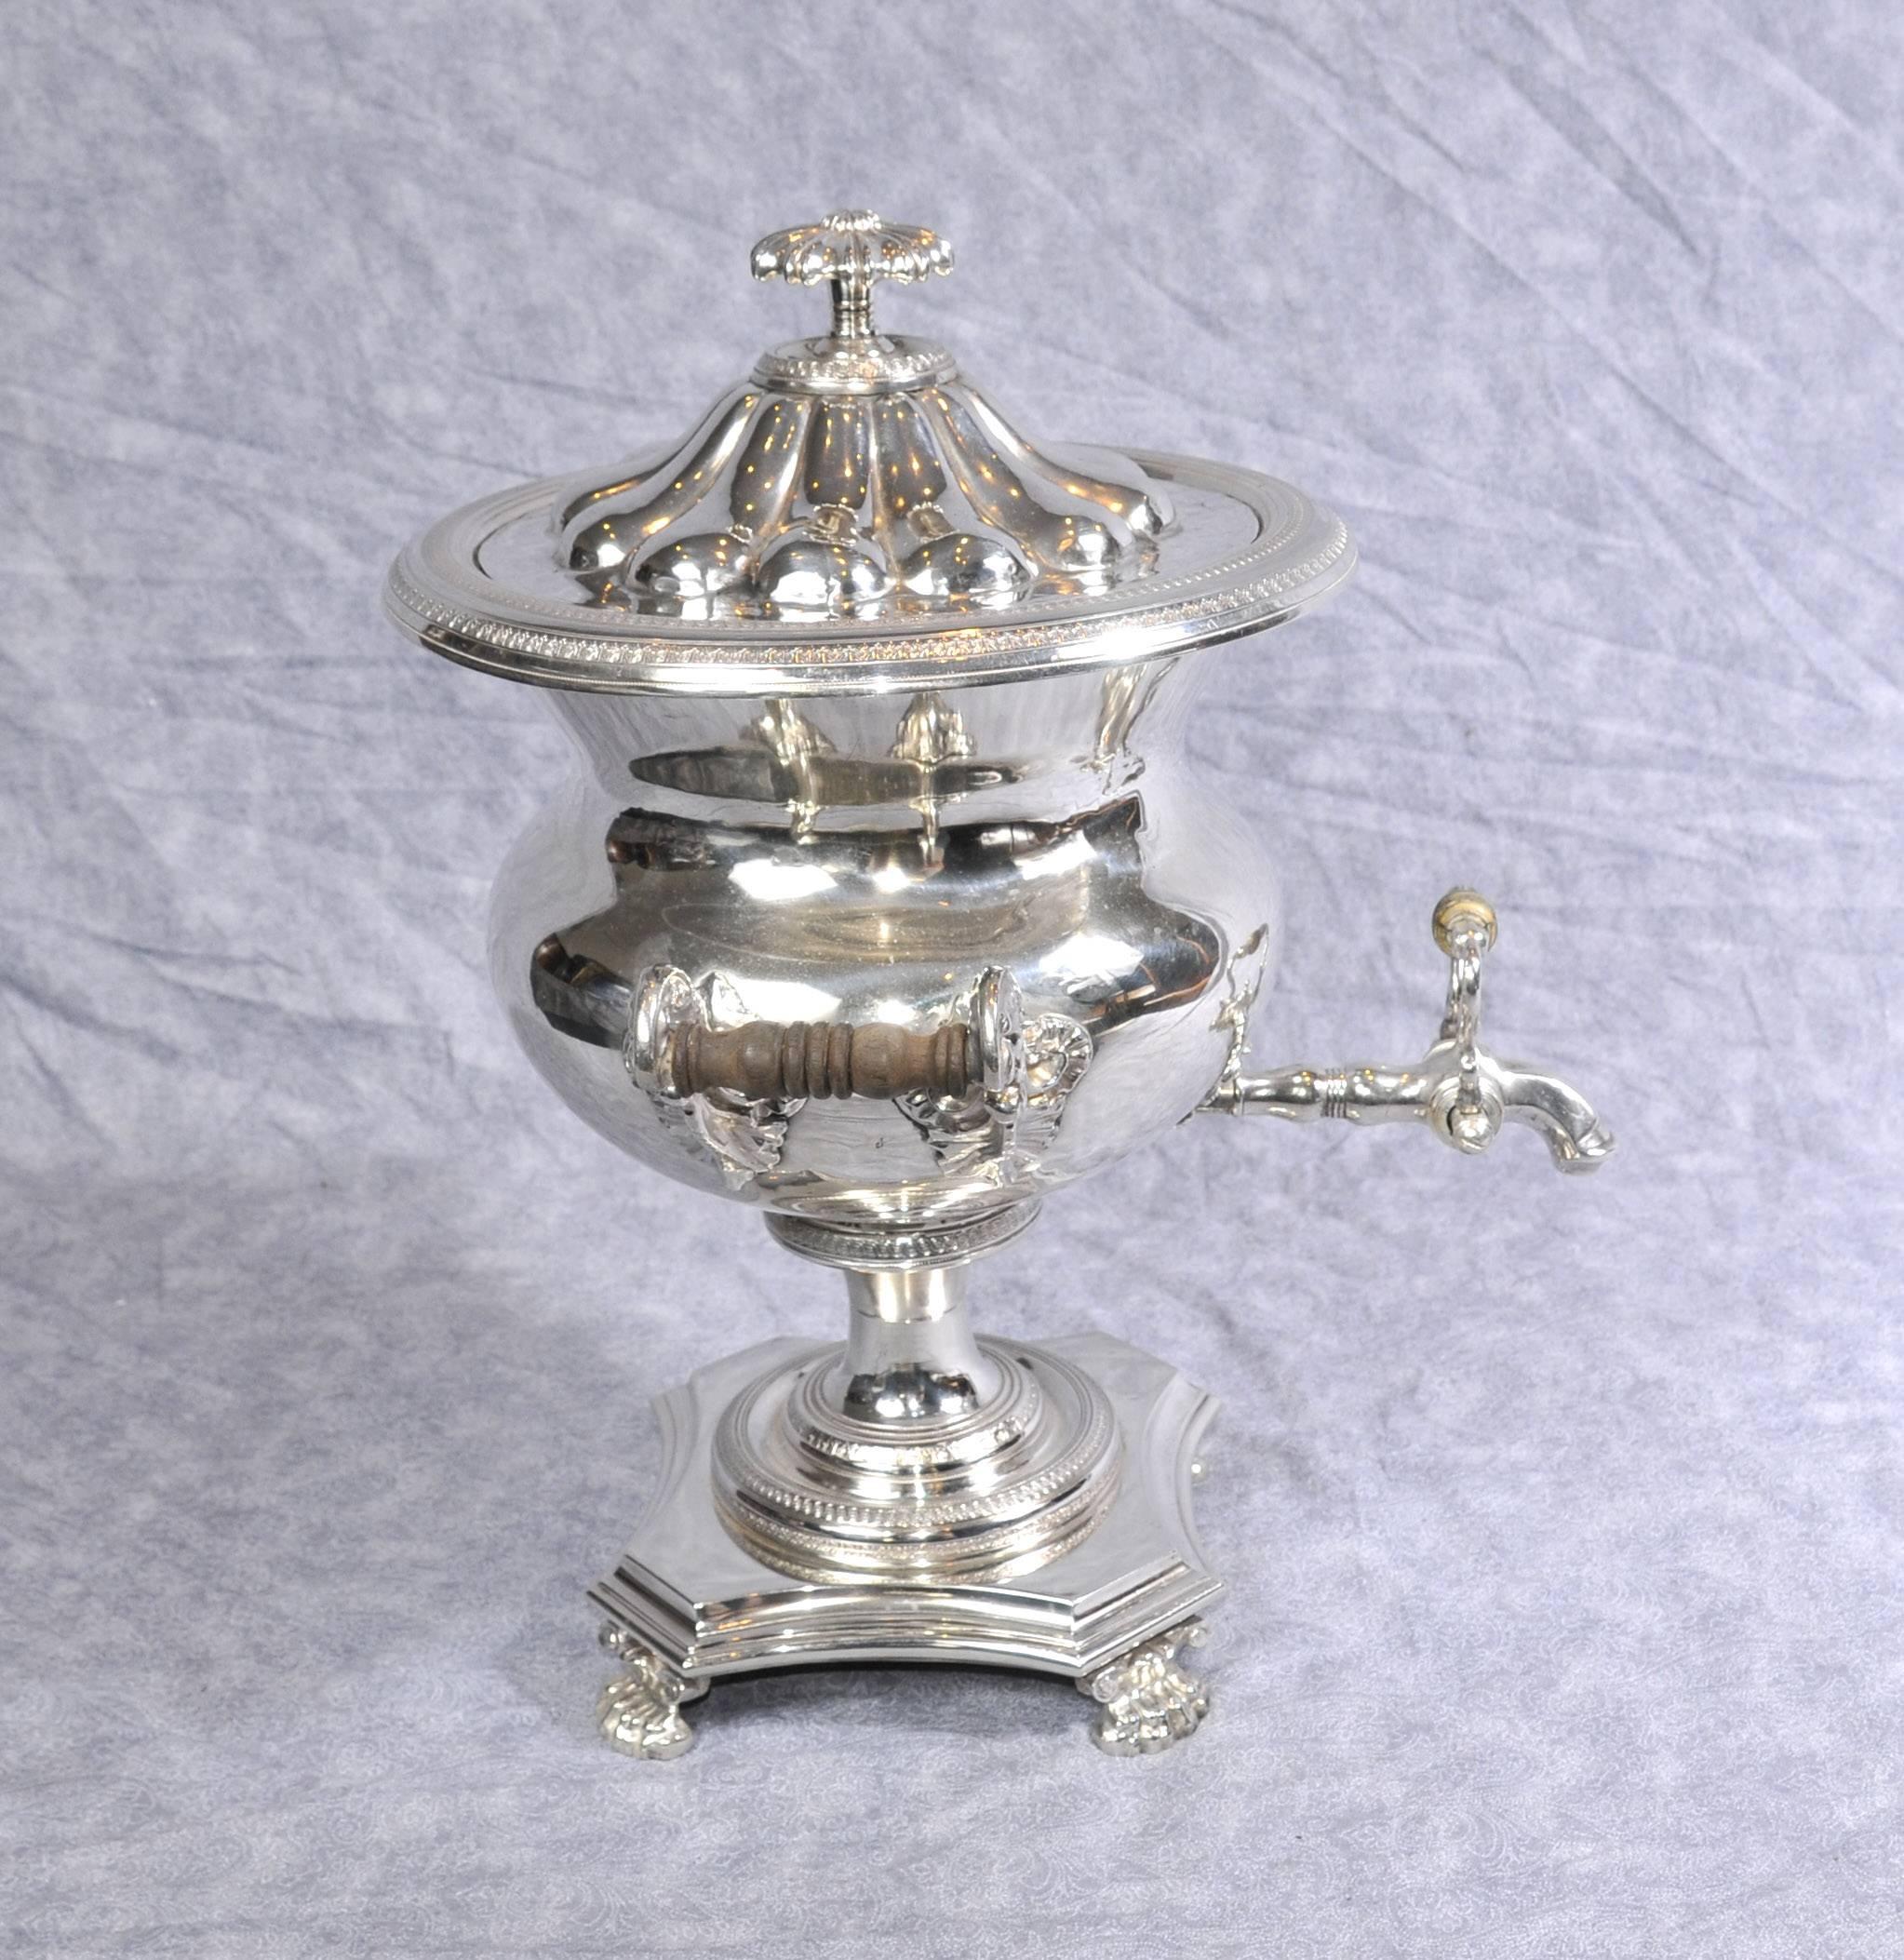 Early 19th Century Antique English Silver Plate Samovar Tea Coffee Urn Sheffield Silver Plate For Sale